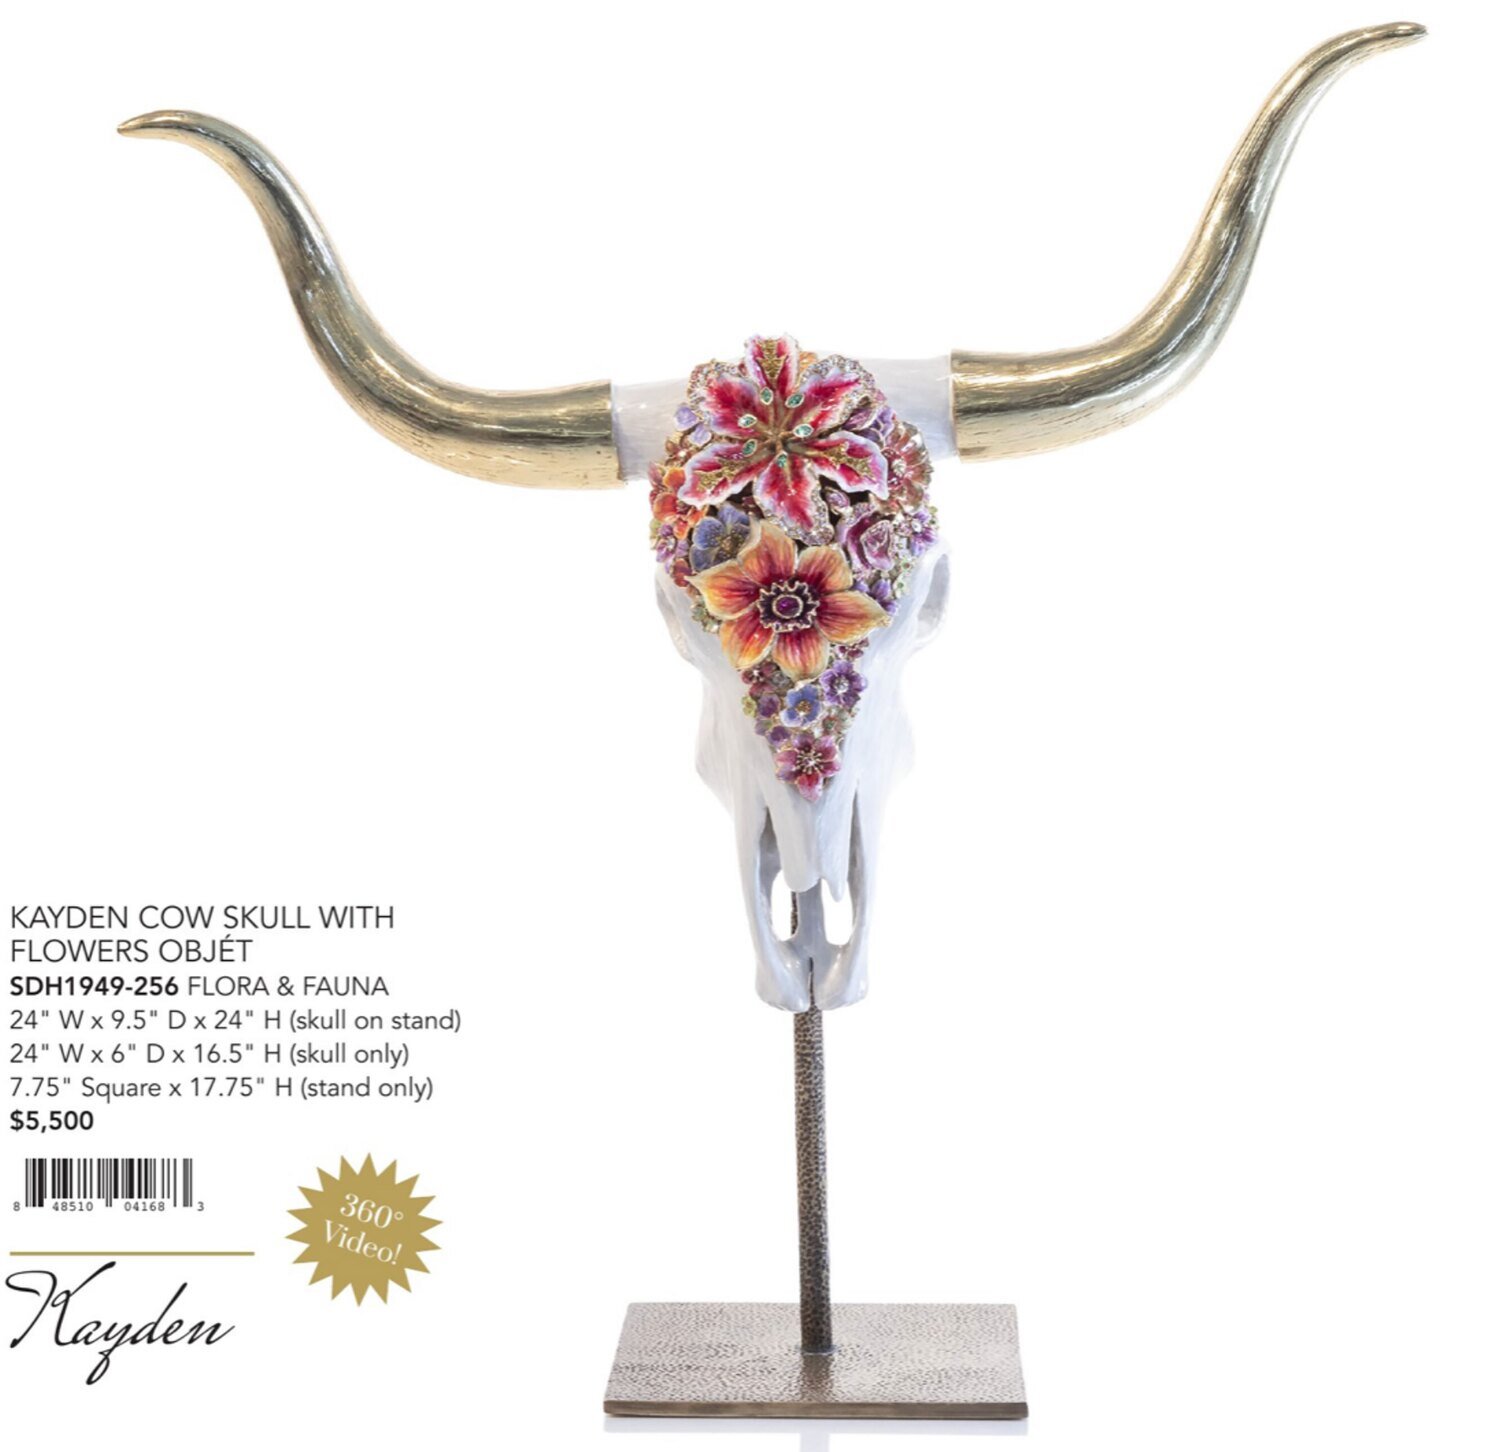 Jay Strongwater Kayden Cow Skull With Flowers Objet Figurine SDH1949-256